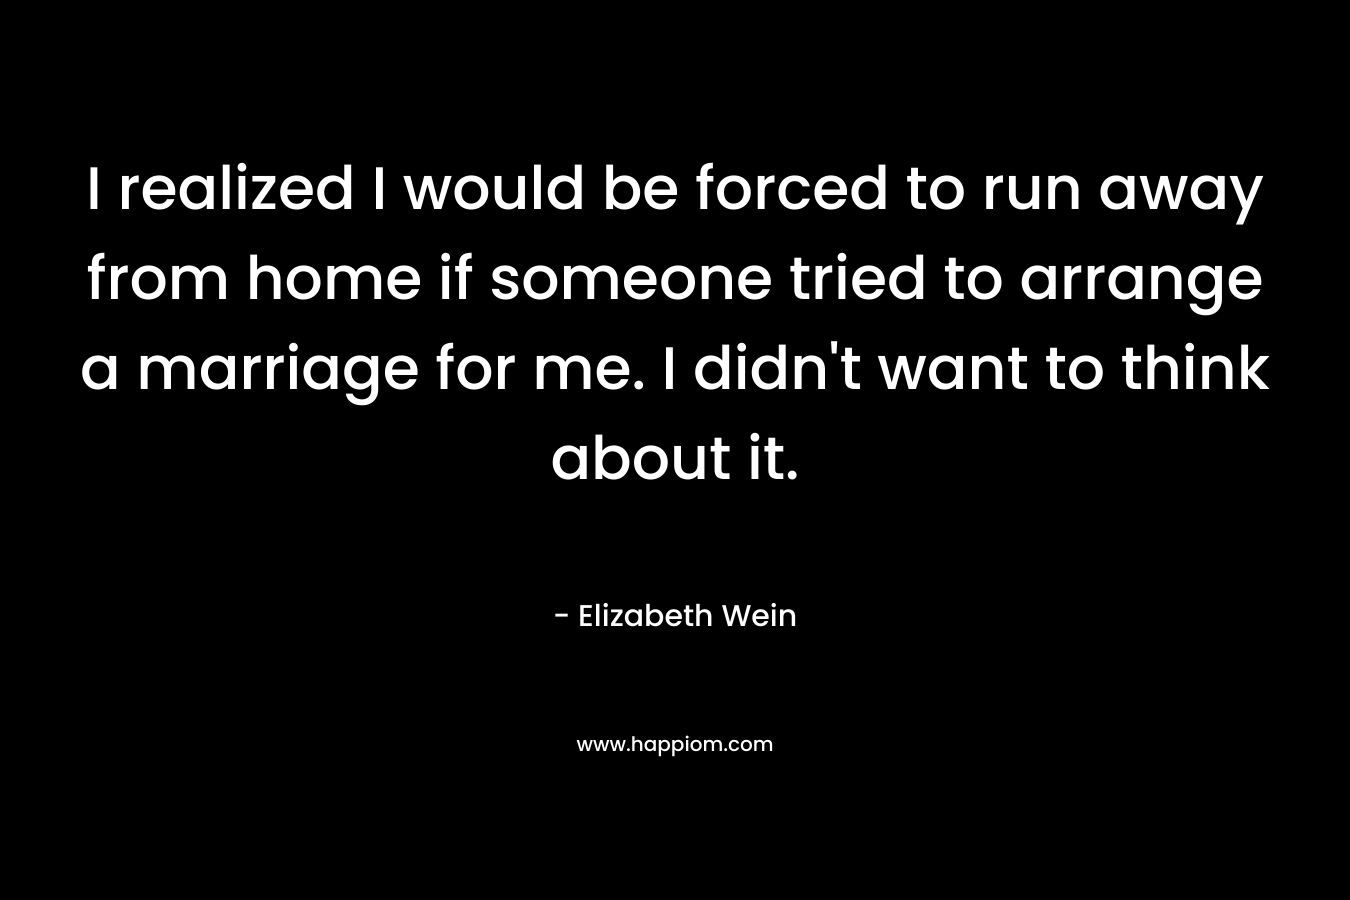 I realized I would be forced to run away from home if someone tried to arrange a marriage for me. I didn’t want to think about it. – Elizabeth Wein